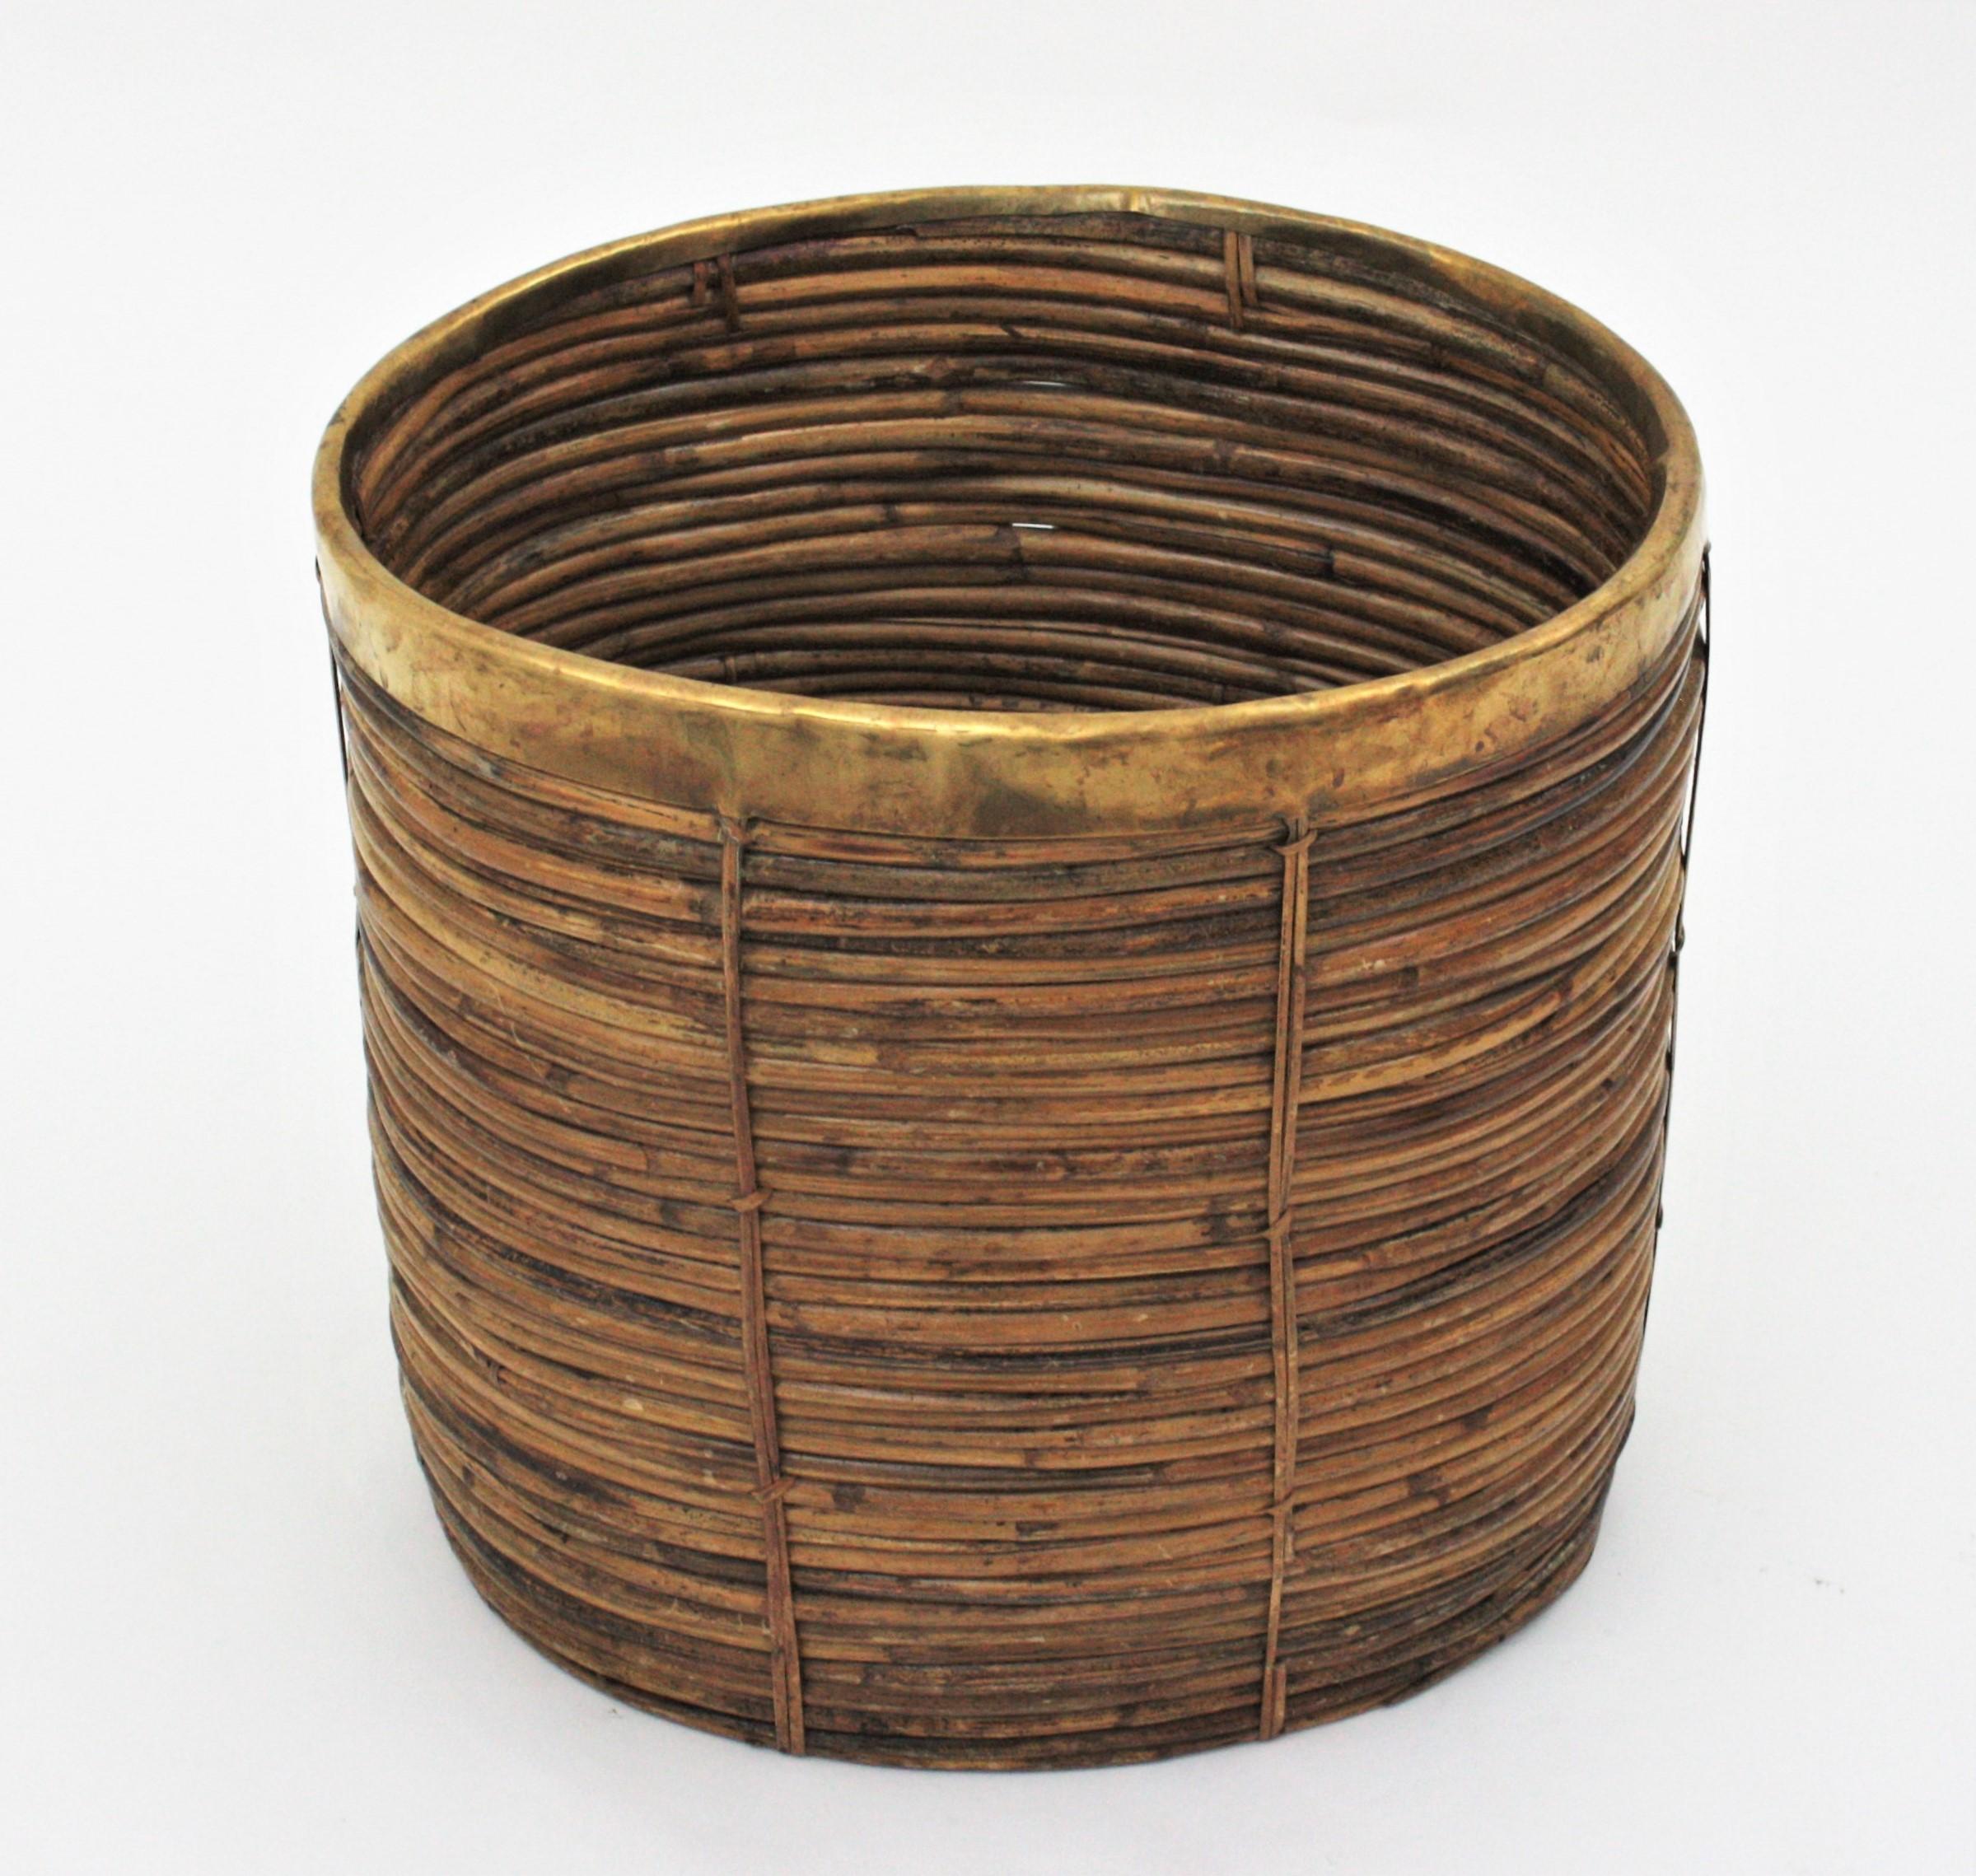 Hand-Carved Large Rattan Bamboo Midcentury Oval Planter with Brass Rim, 1960s